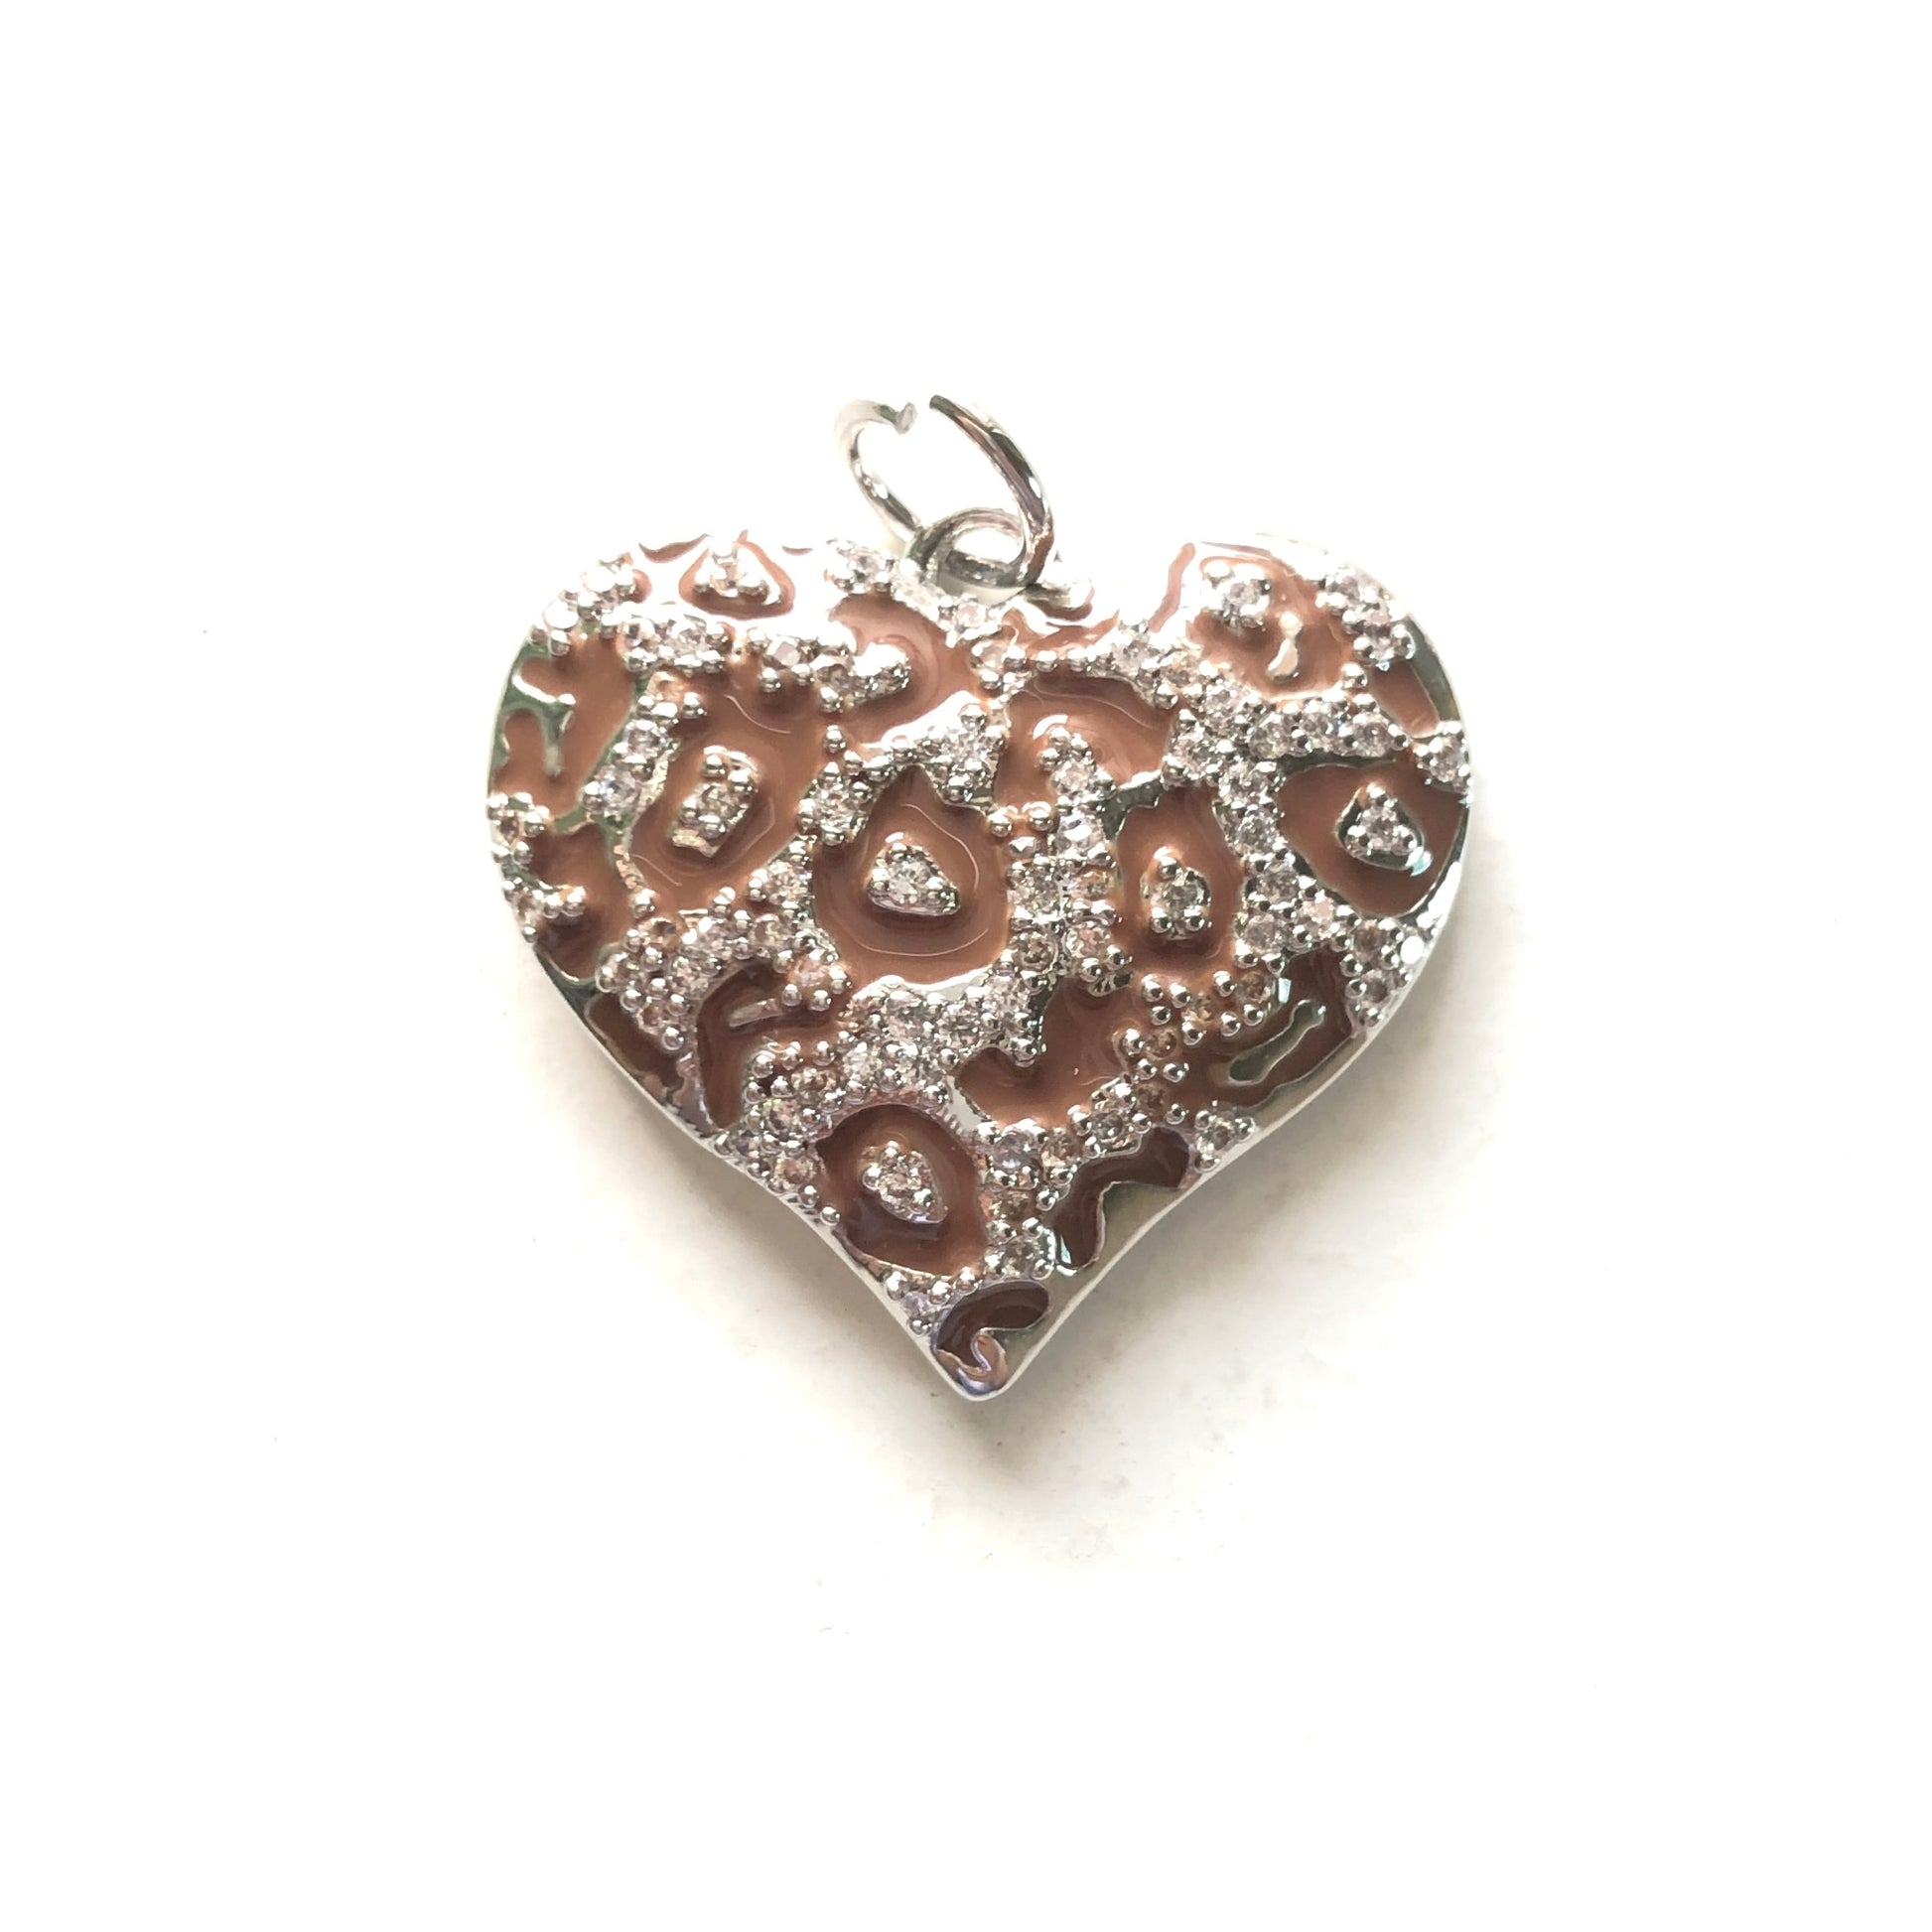 10/lot 24.5*22mm CZ Paved Brown Leopard Print Heart Charm Pendants Silver CZ Paved Charms Hearts Leopard Printed New Charms Arrivals Charms Beads Beyond